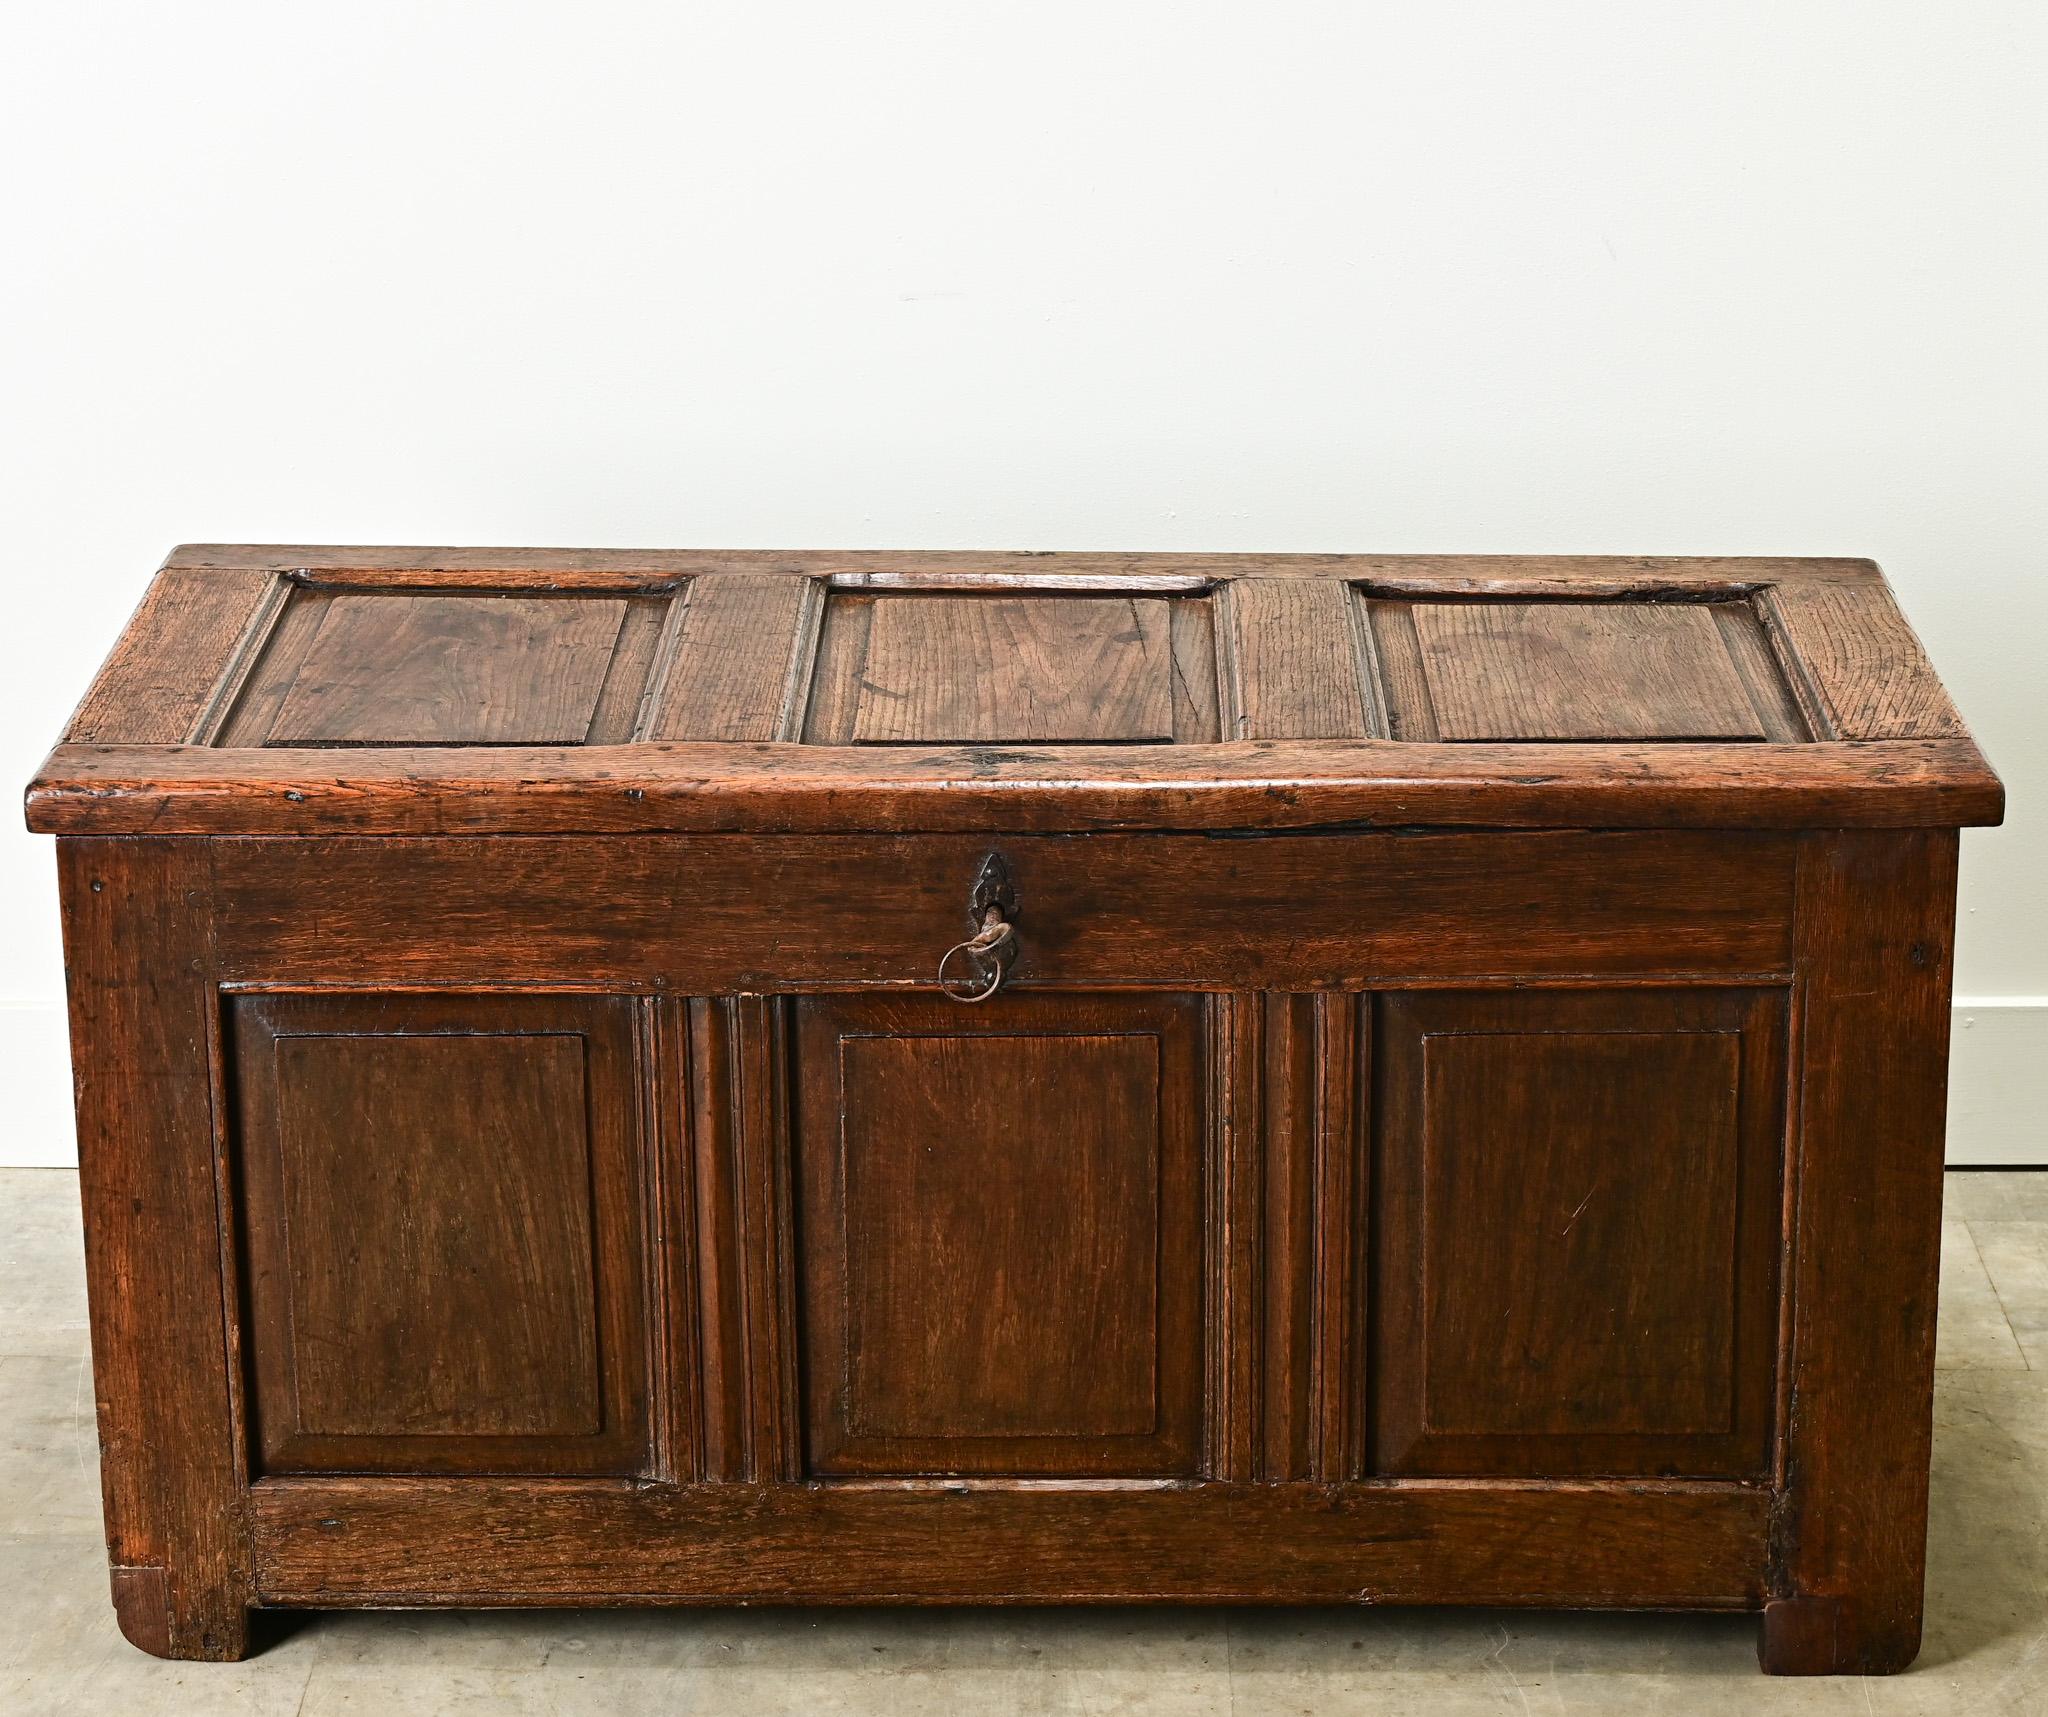 This French solid oak paneled coffer is from the 1800’s. The sturdy trunk opens on hand forged iron hinges with its original working lock and key. The interior is open and has a candle box on the top right side. Cleaned and polished with a French